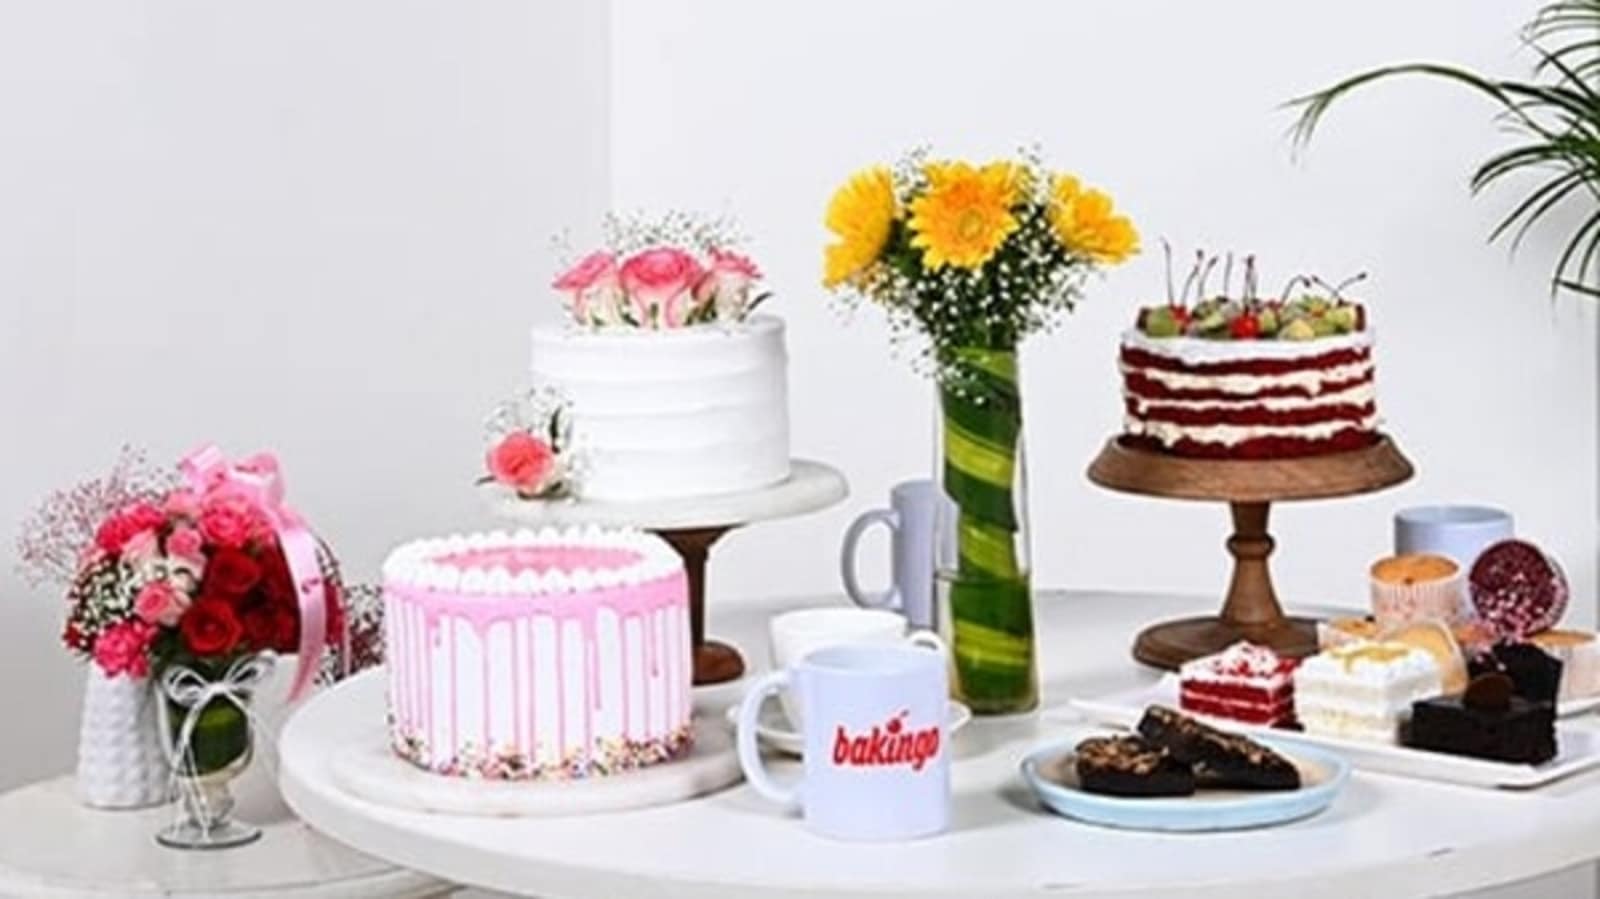 Online Cake Home Delivery in Bangalore by Bakingo - The Best Cake Shop |  Cake home delivery, Cake, Online cake delivery